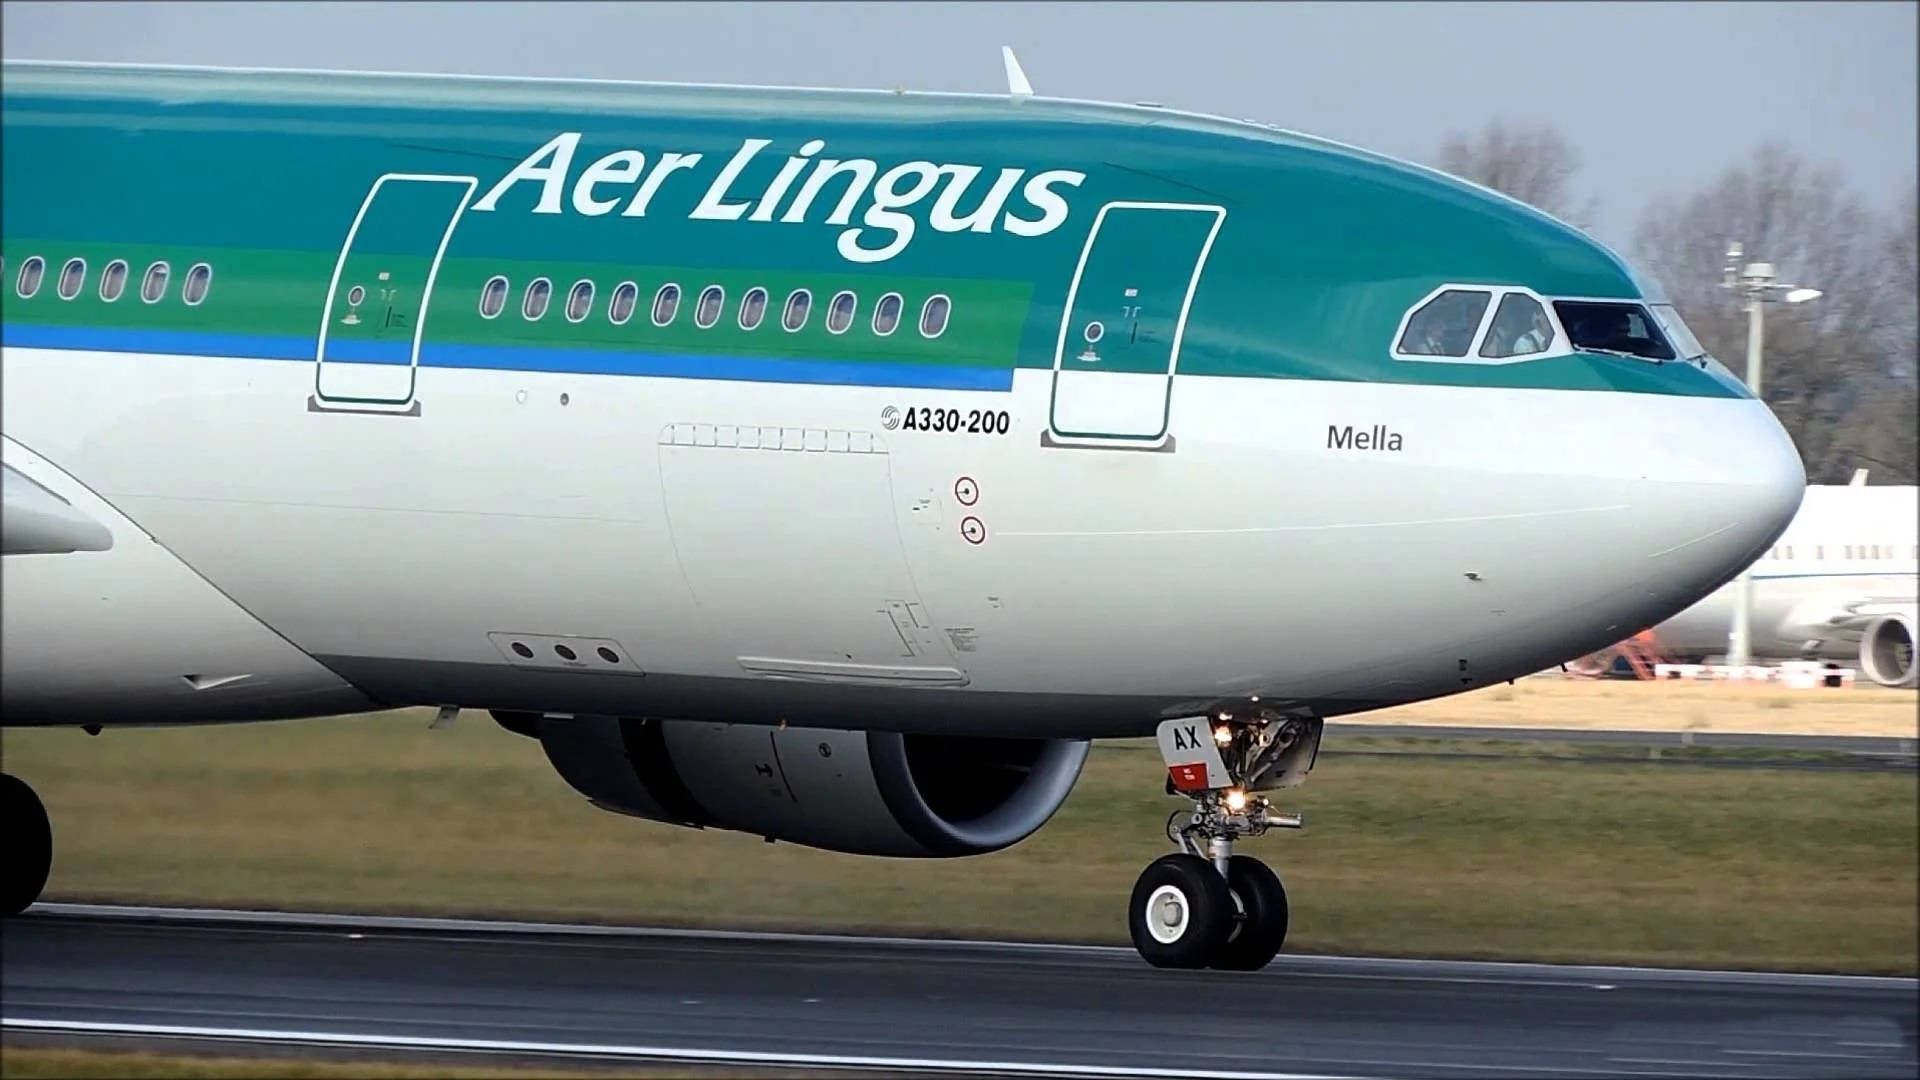 Aer Lingus Airplane On Runway Picture